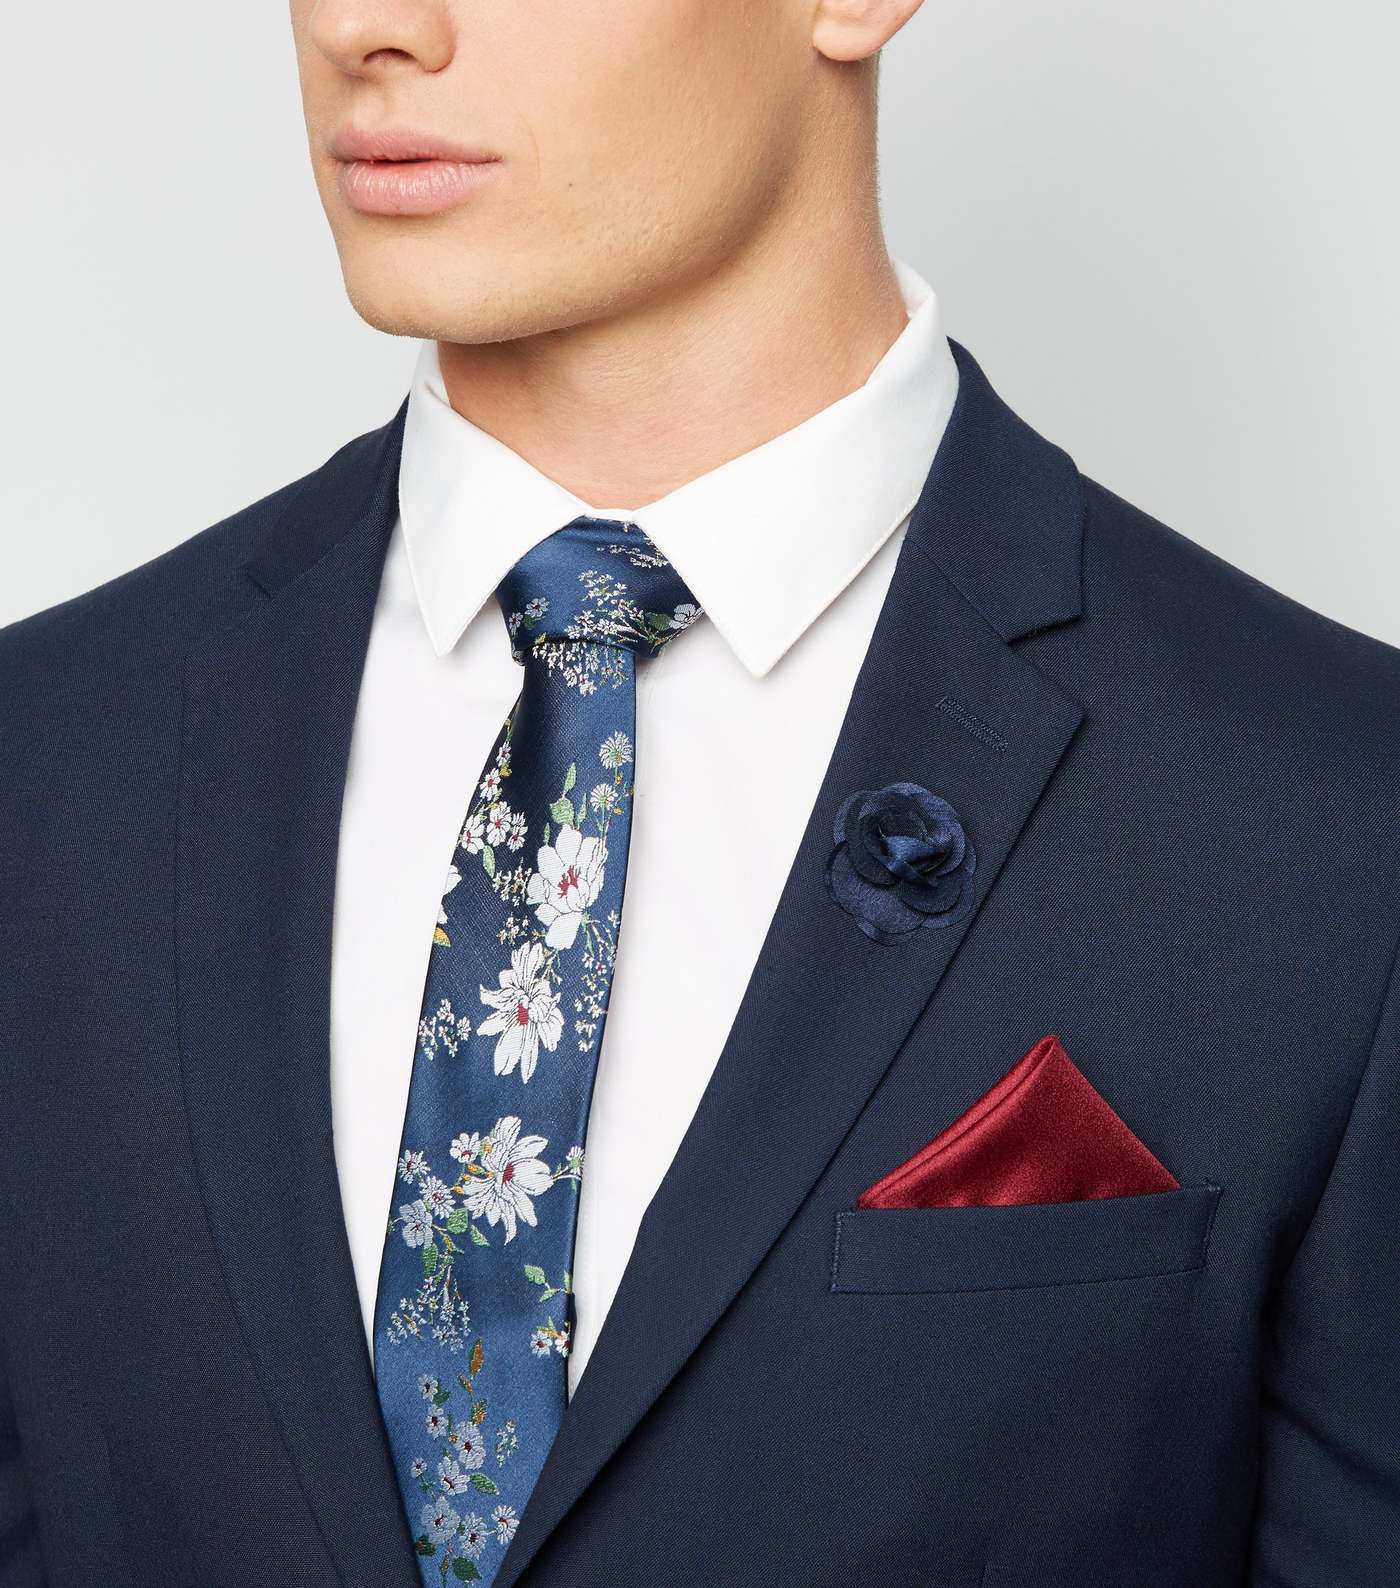 Navy Floral Tie Handkerchief and Pin Set Image 2